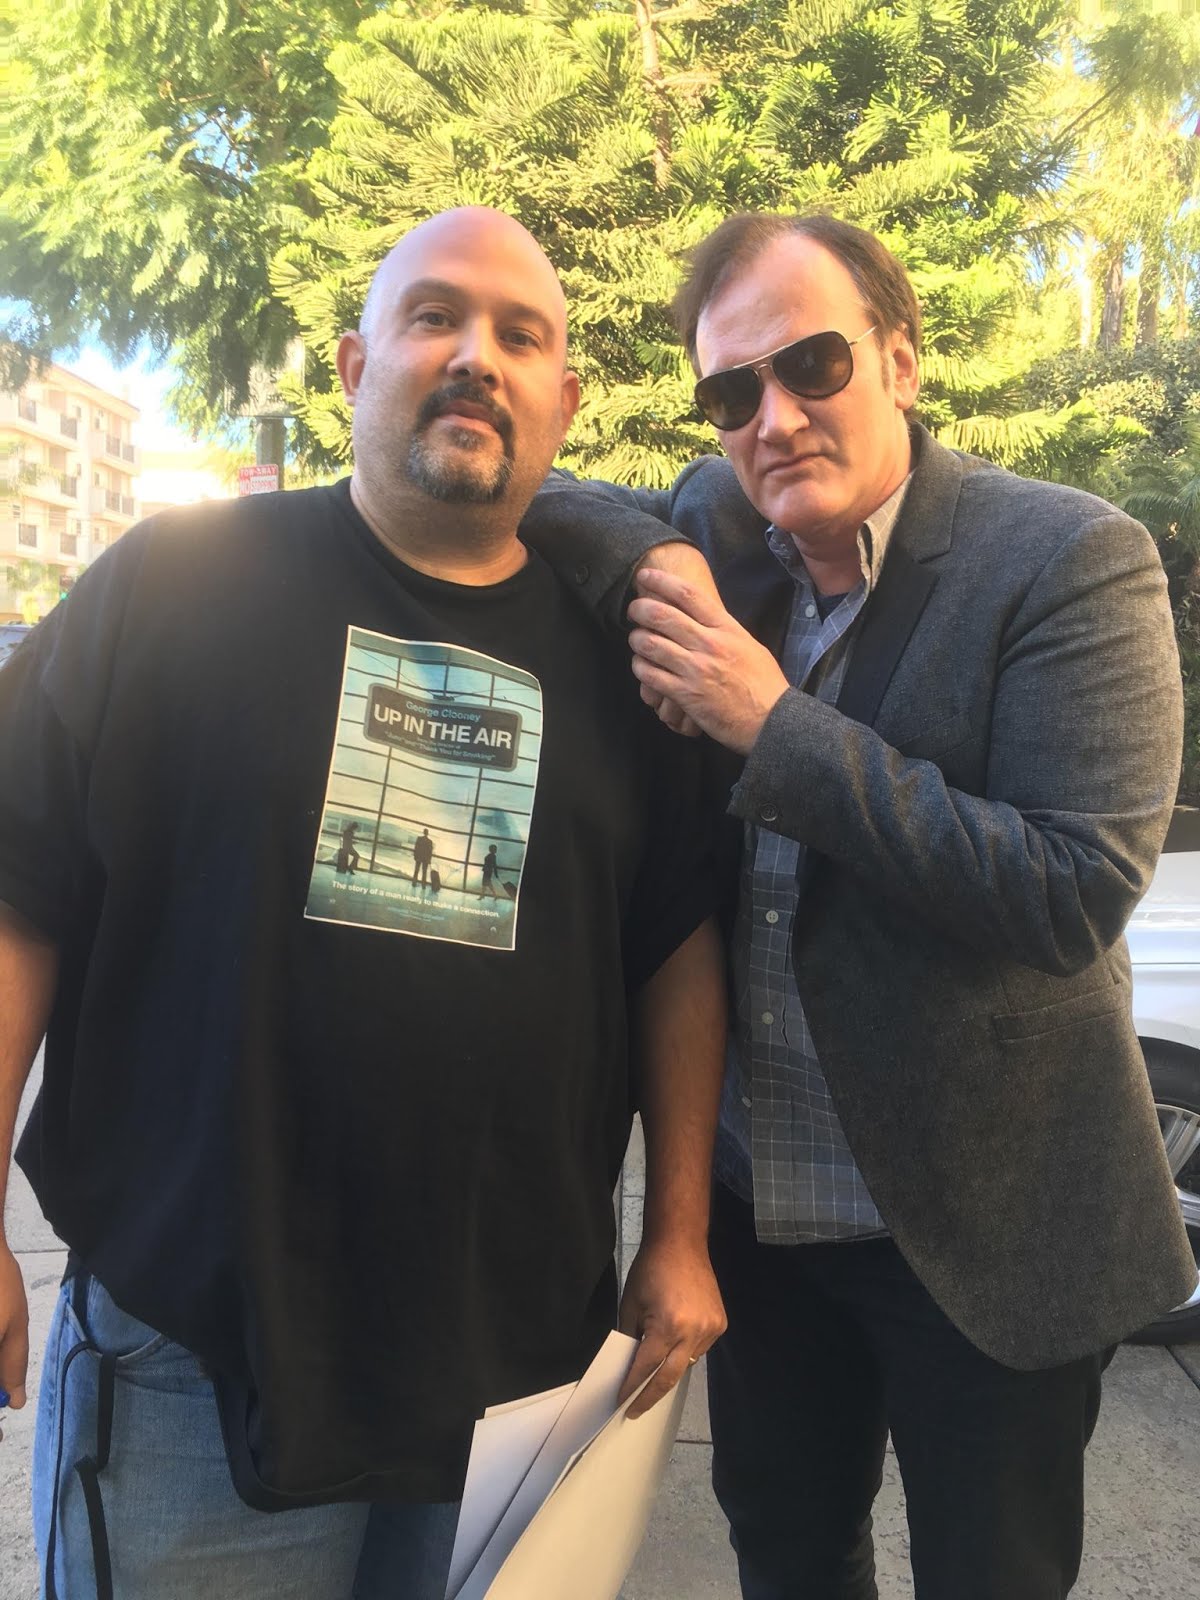 Me and Quentin Tarantino